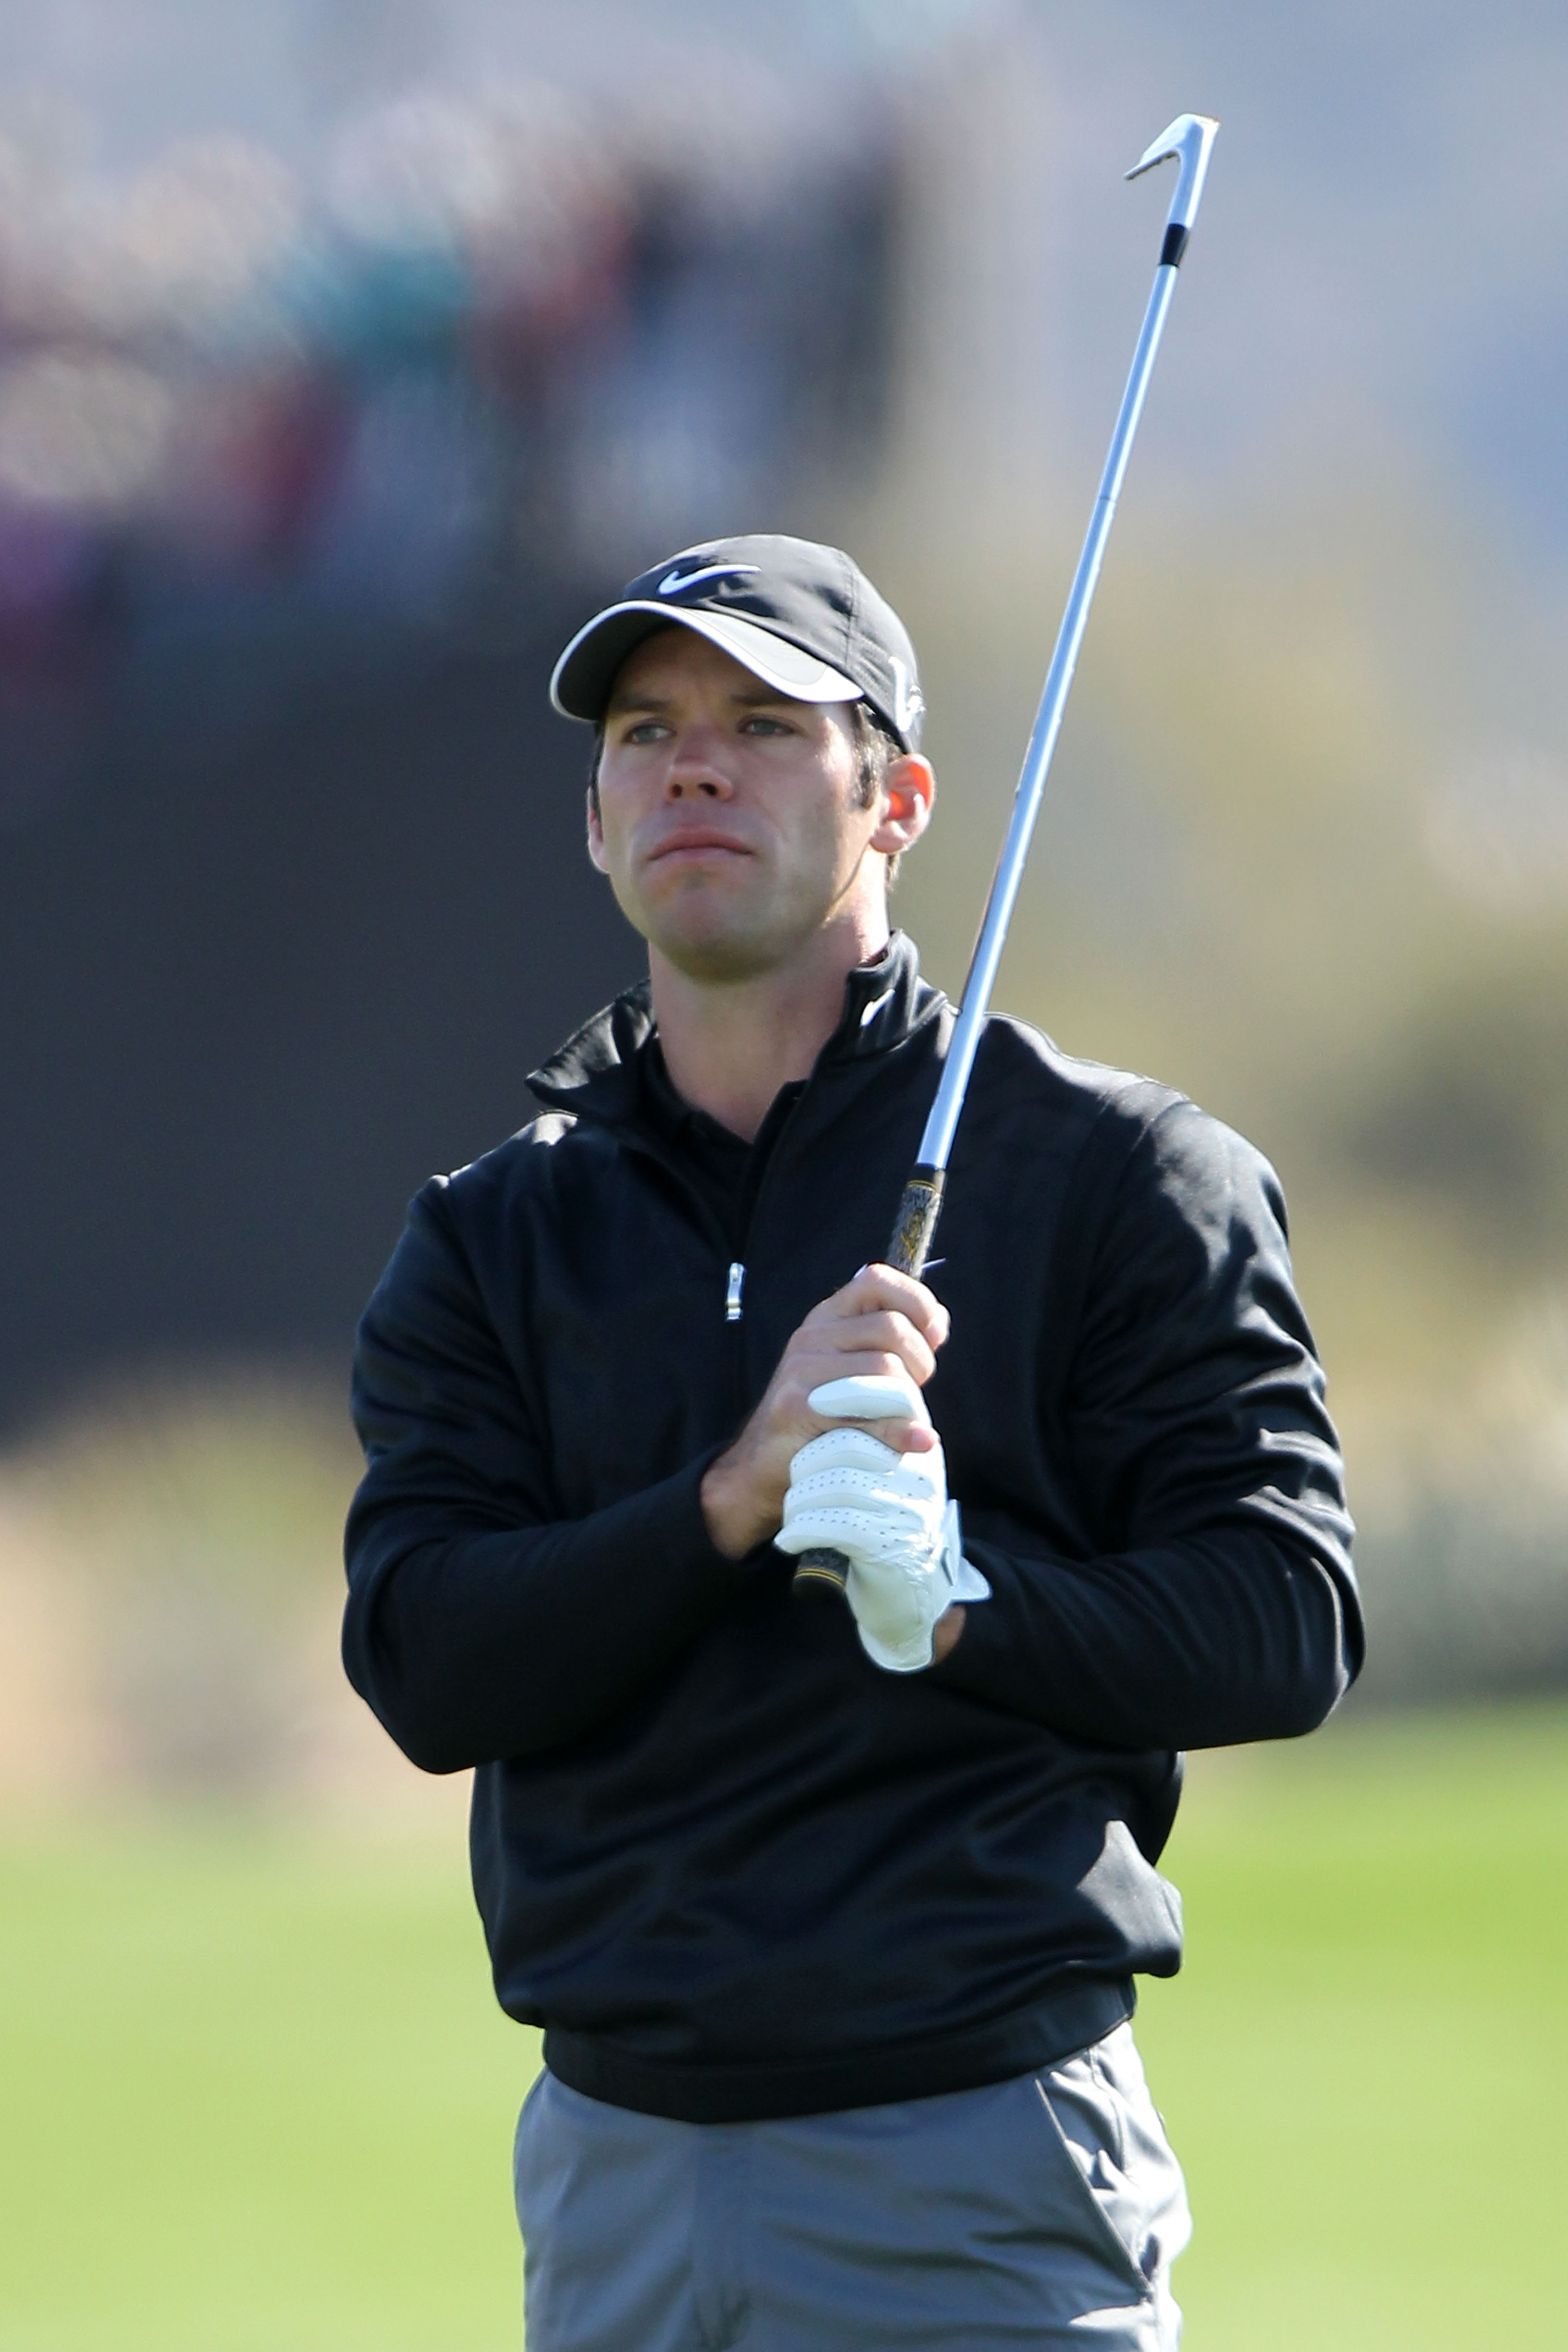 MARANA, AZ - FEBRUARY 24:  Paul Casey of England watches his second shot on the first hole during the second round of the Accenture Match Play Championship at the Ritz-Carlton Golf Club on February 24, 2011 in Marana, Arizona.  (Photo by Andy Lyons/Getty